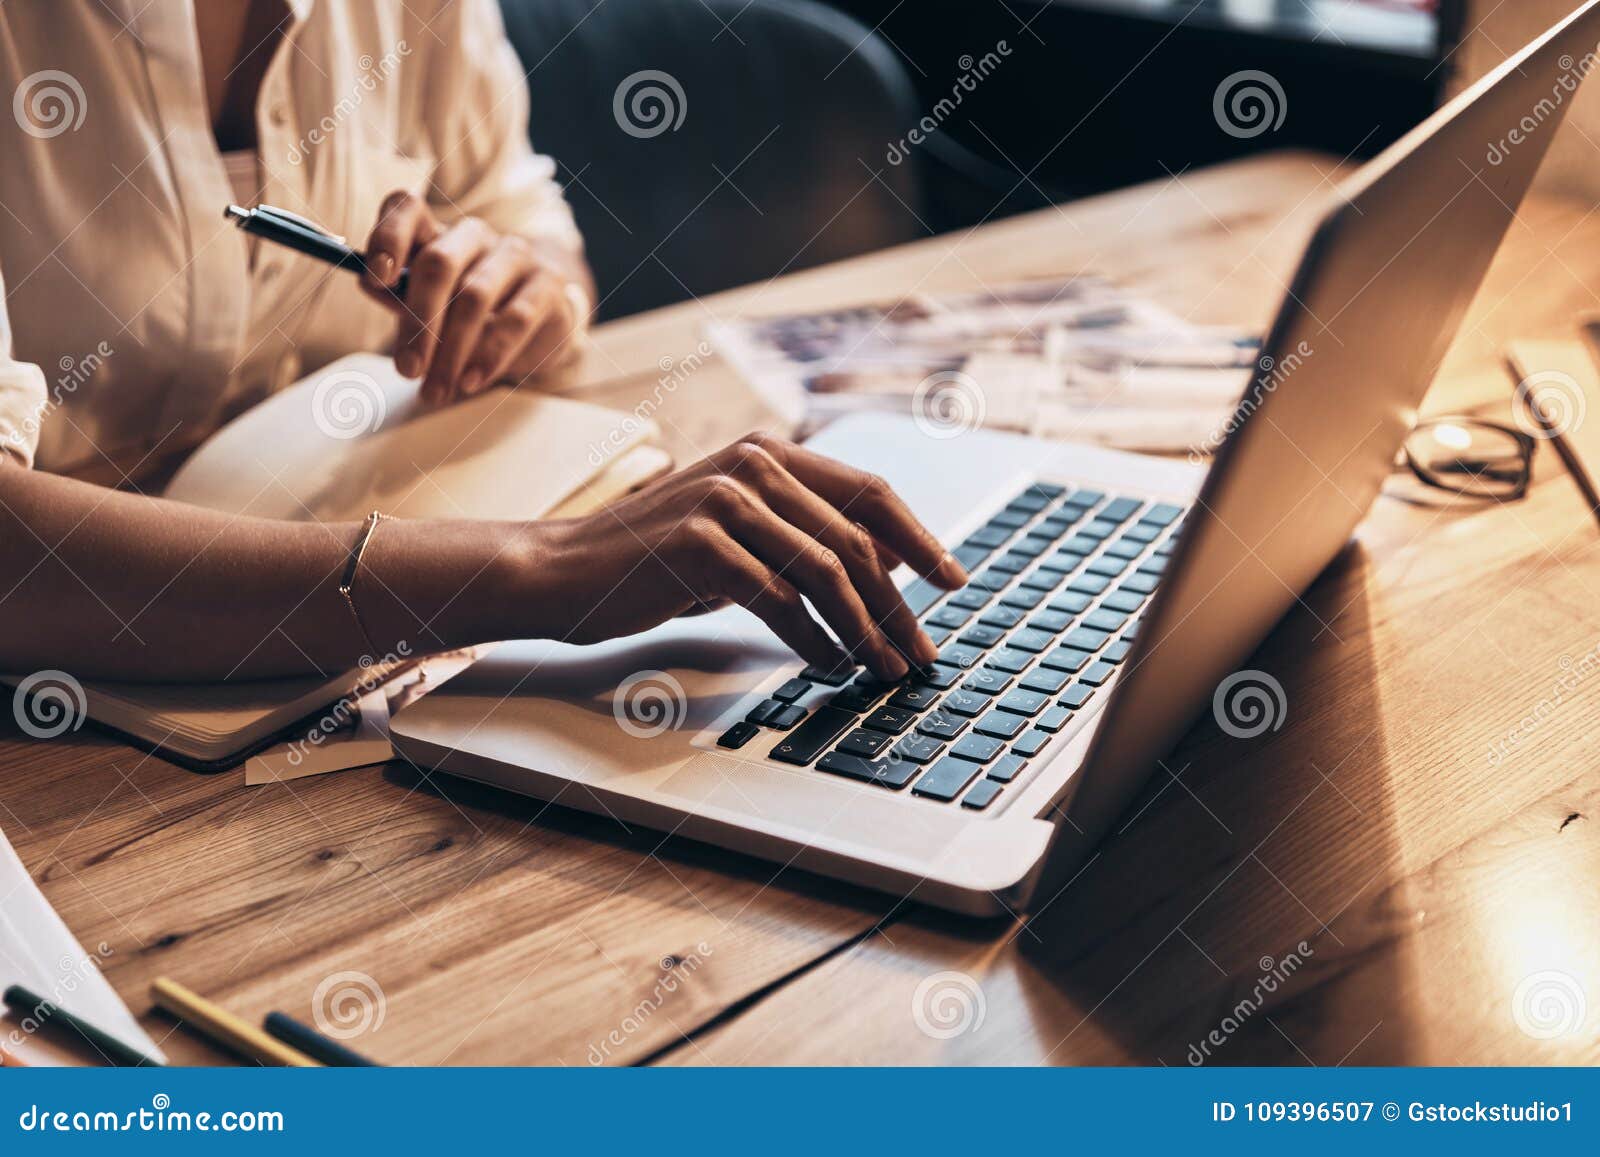 always online. close up of young woman working using computer while sitting in her workshop